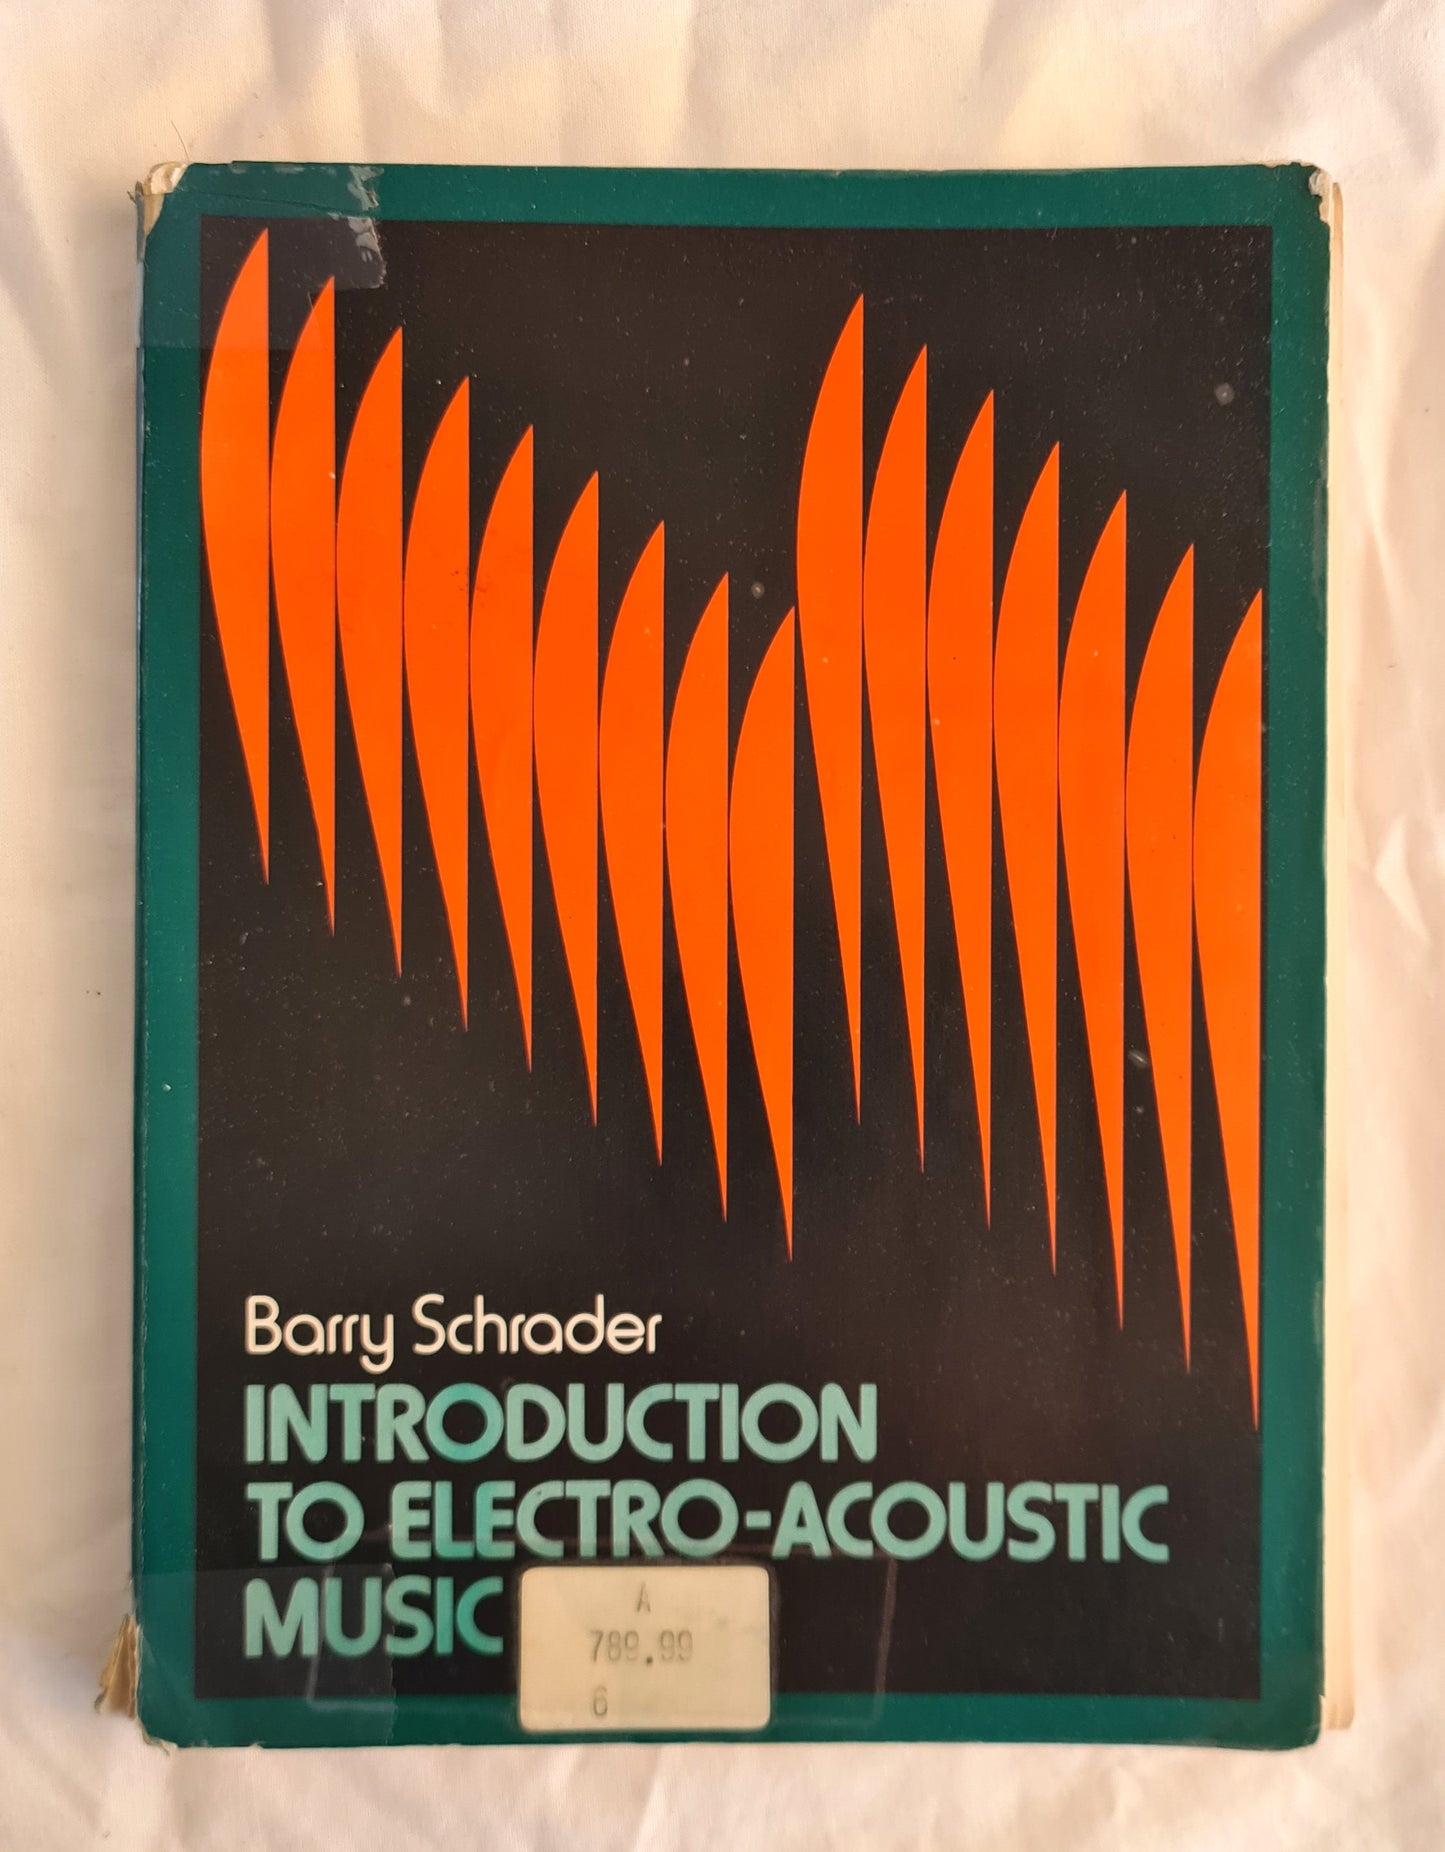 Introduction to Electro-Acoustic Music  by Barry Schrader